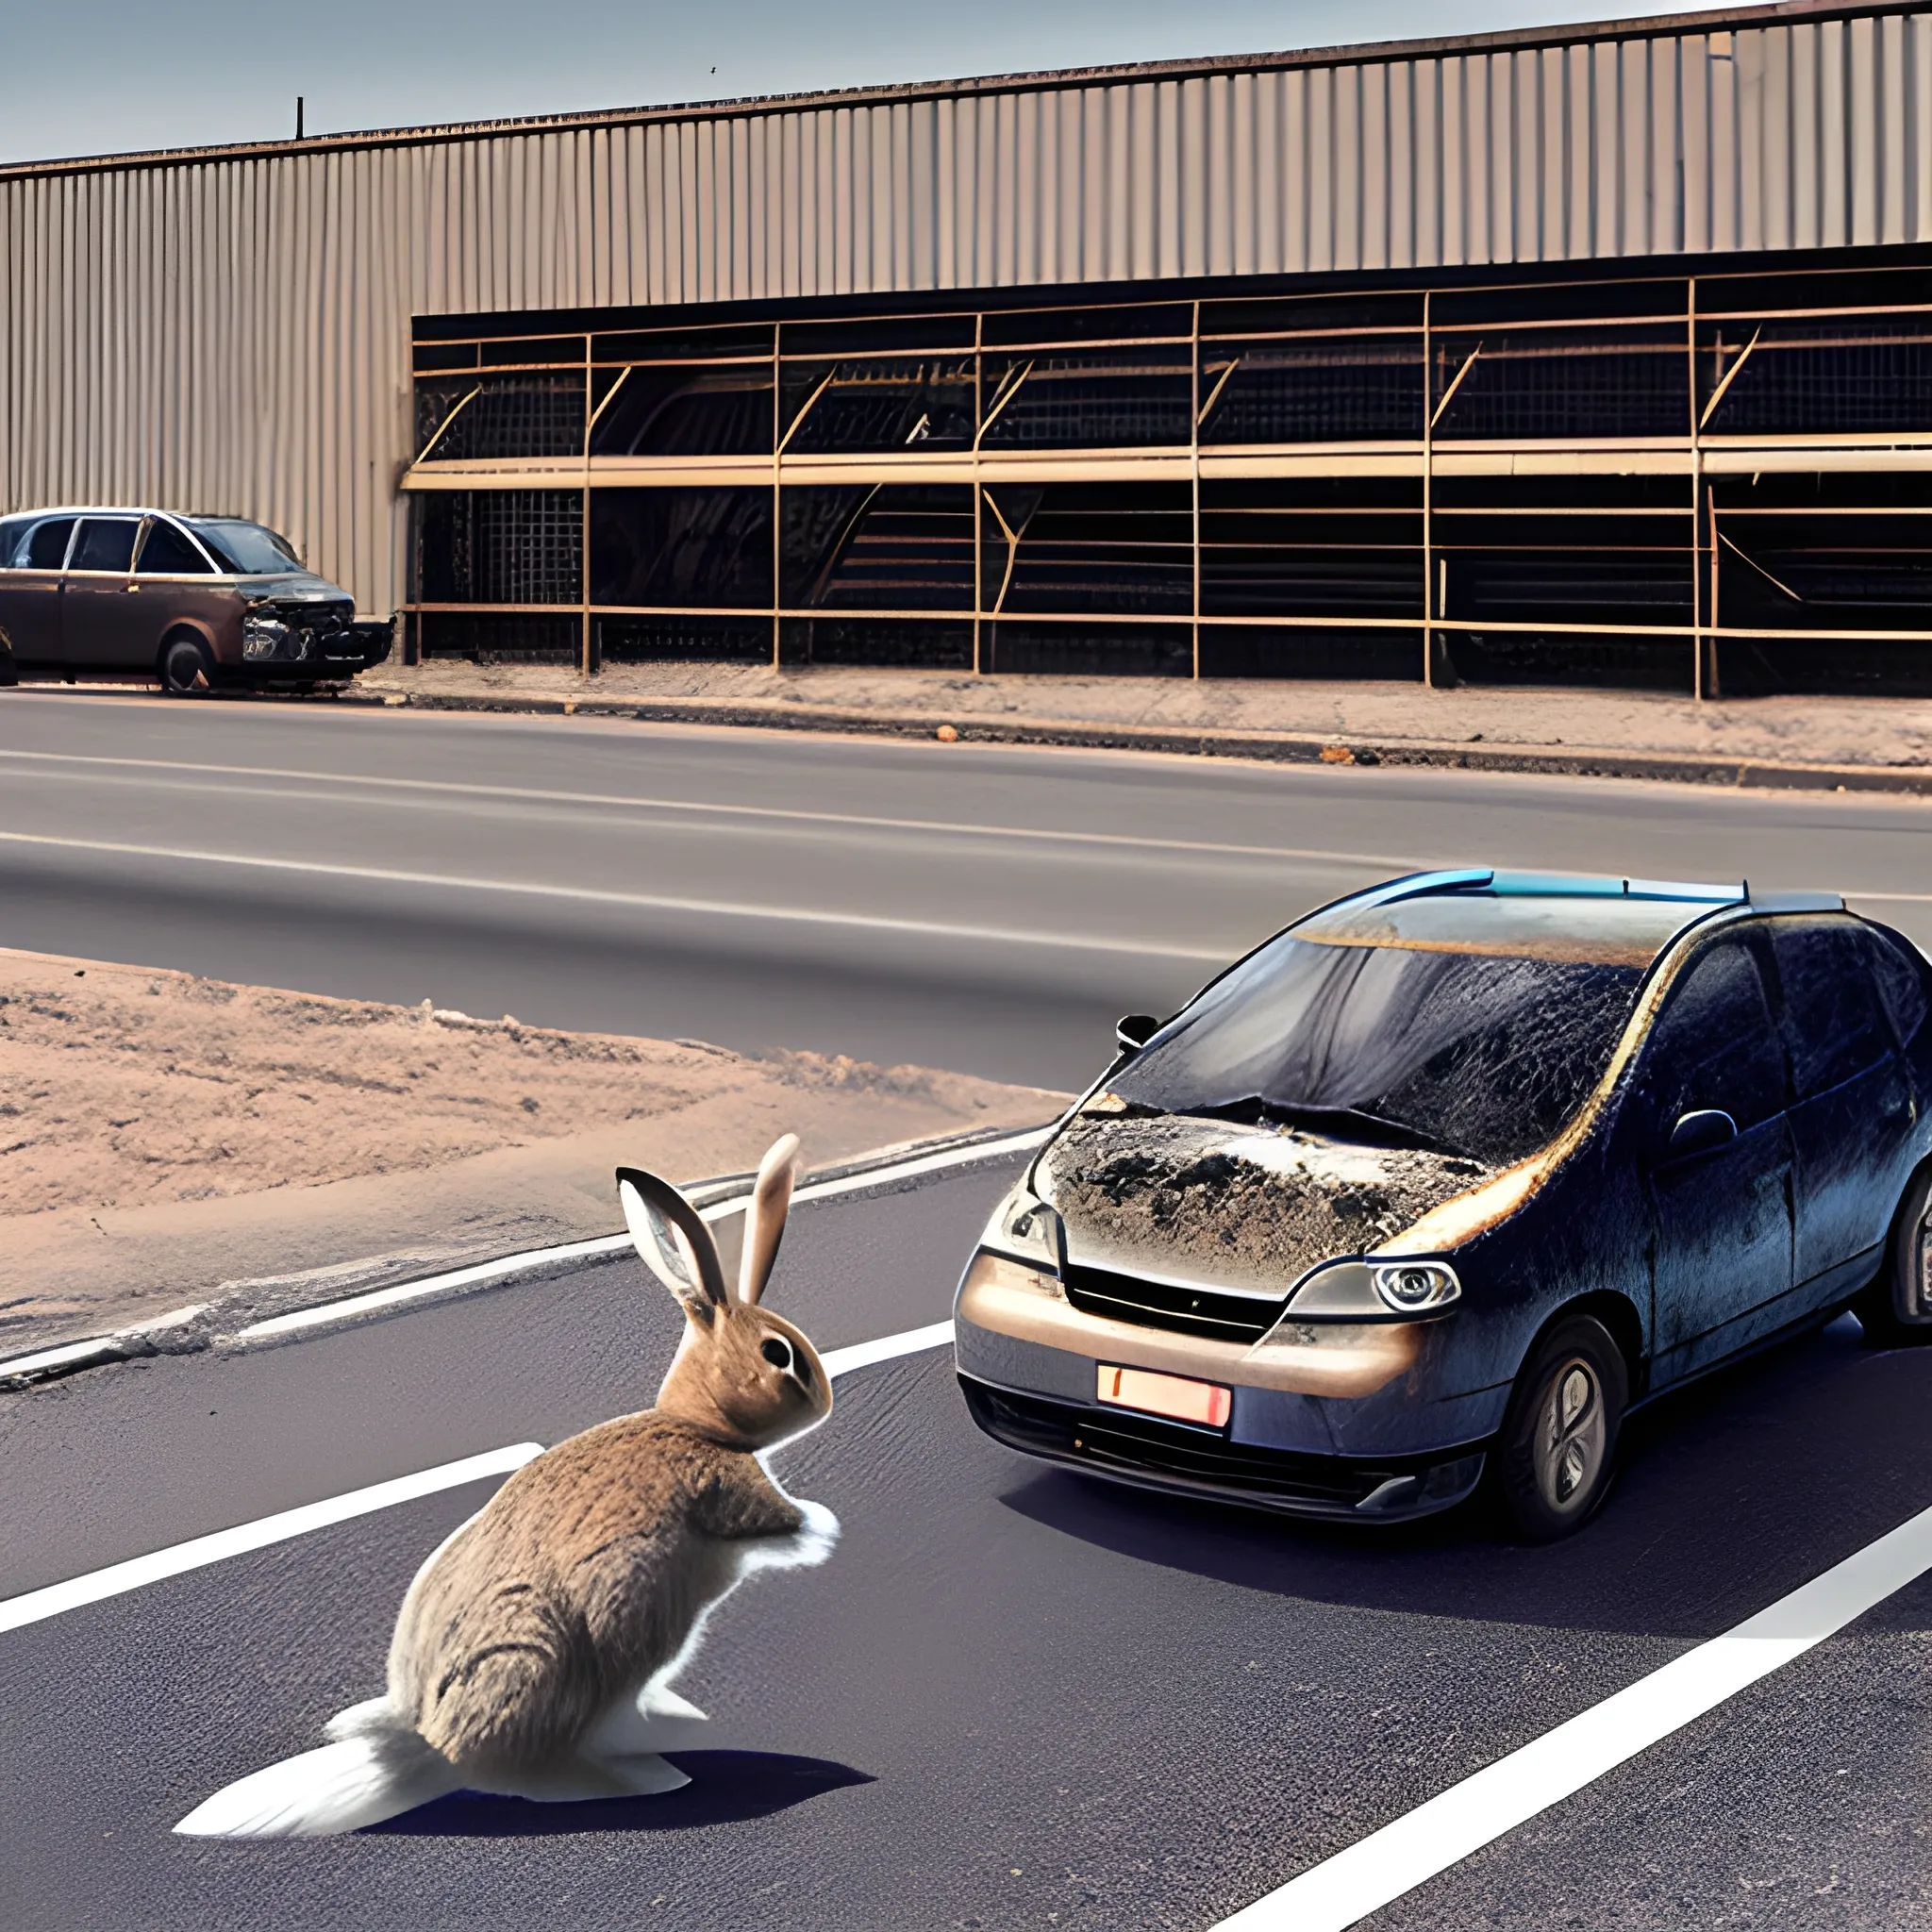 one moving car crushes a rabbit on the road, factory background, photography